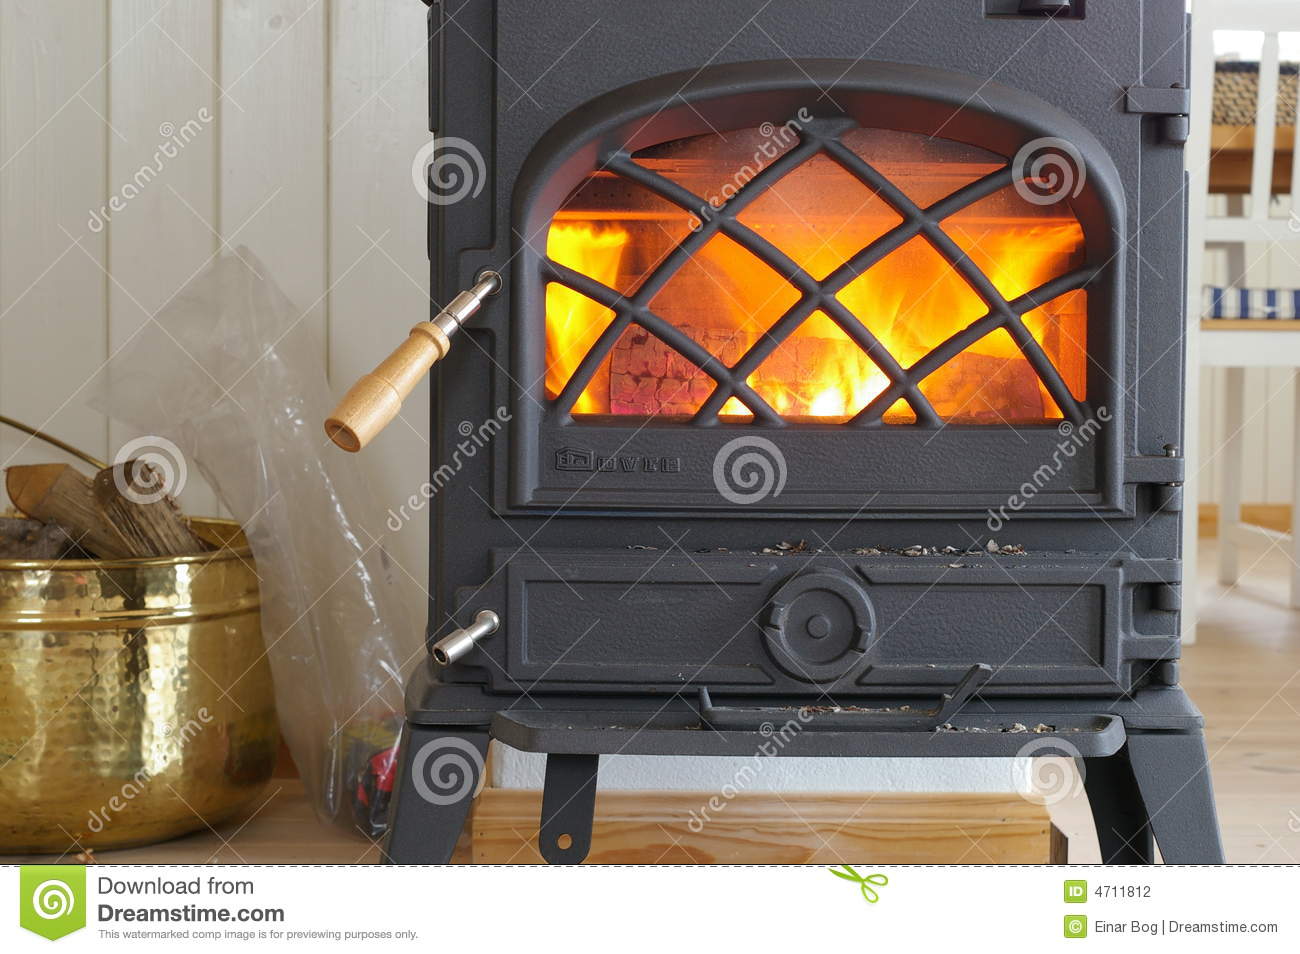 Wood Burning Stove With Fire Stock Photography   Image  4711812